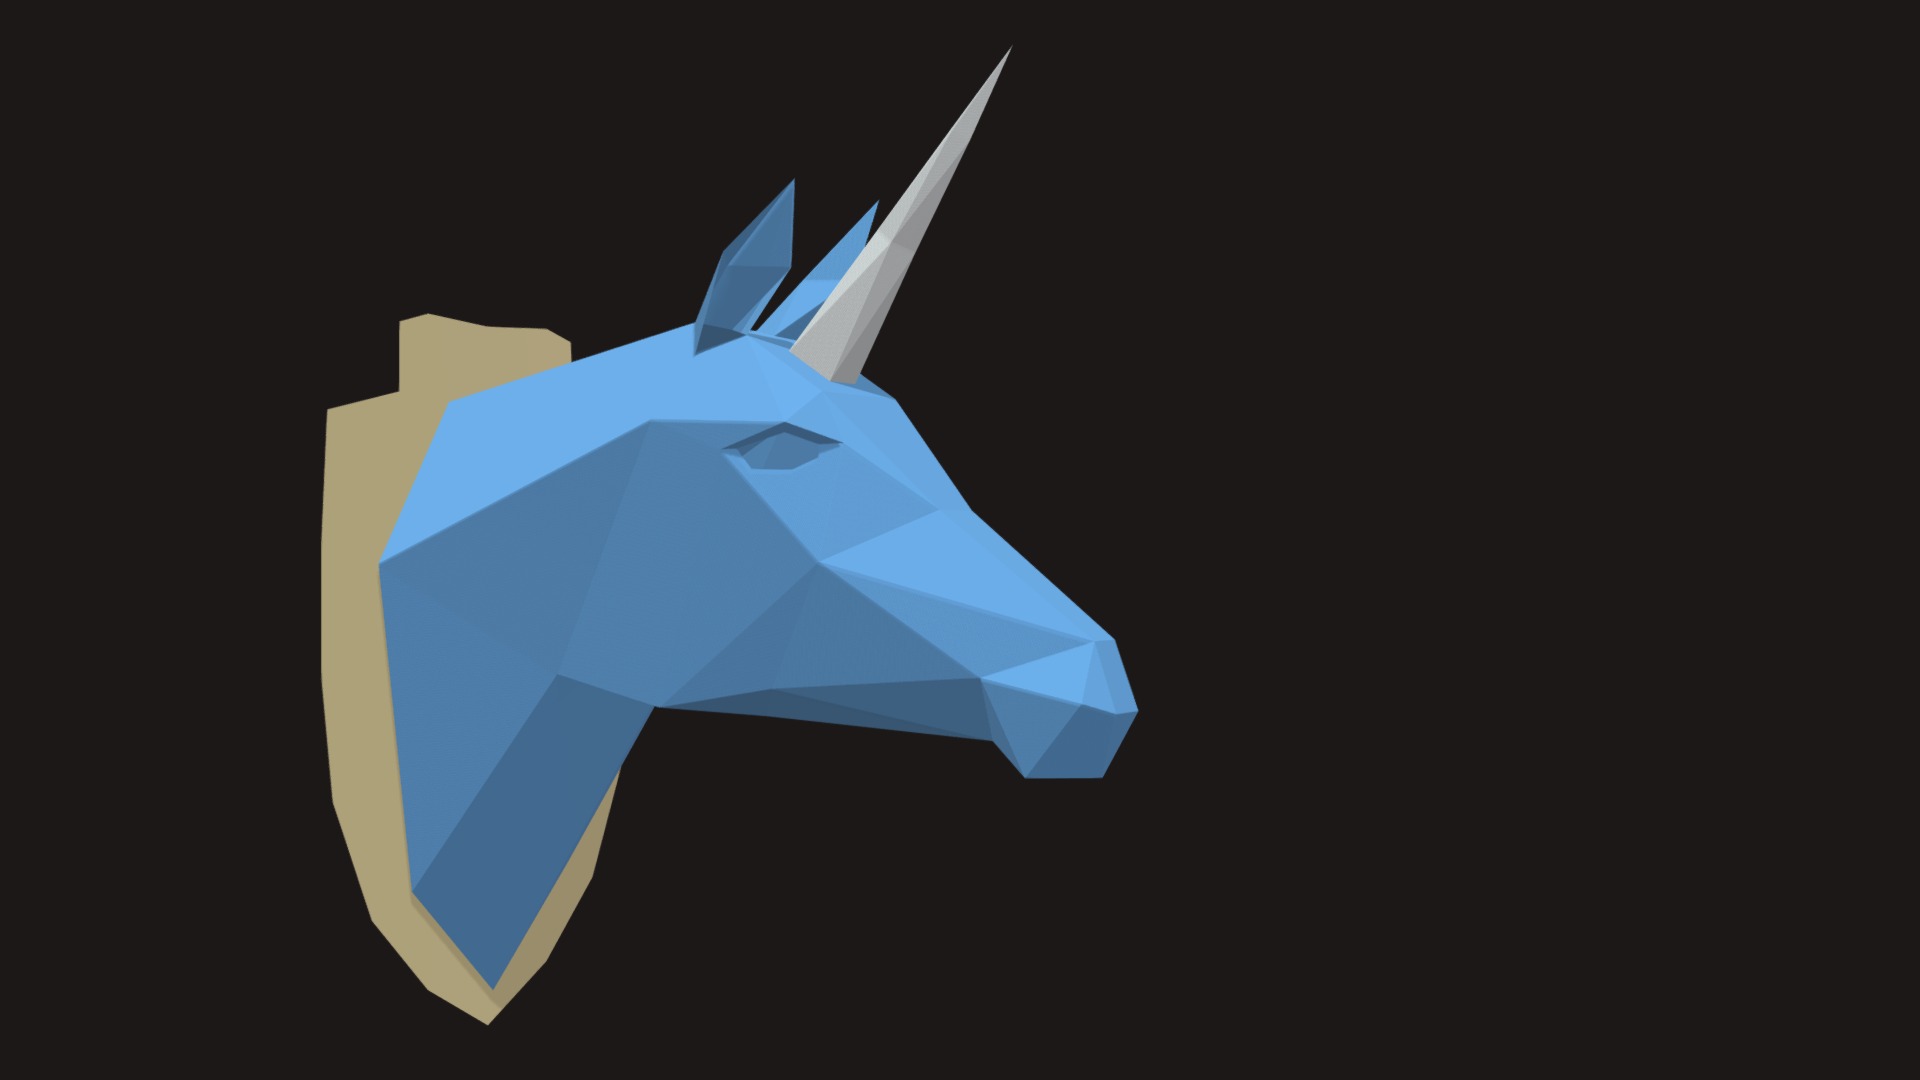 3D model Horse-unicorn - This is a 3D model of the Horse-unicorn. The 3D model is about a blue and white logo.